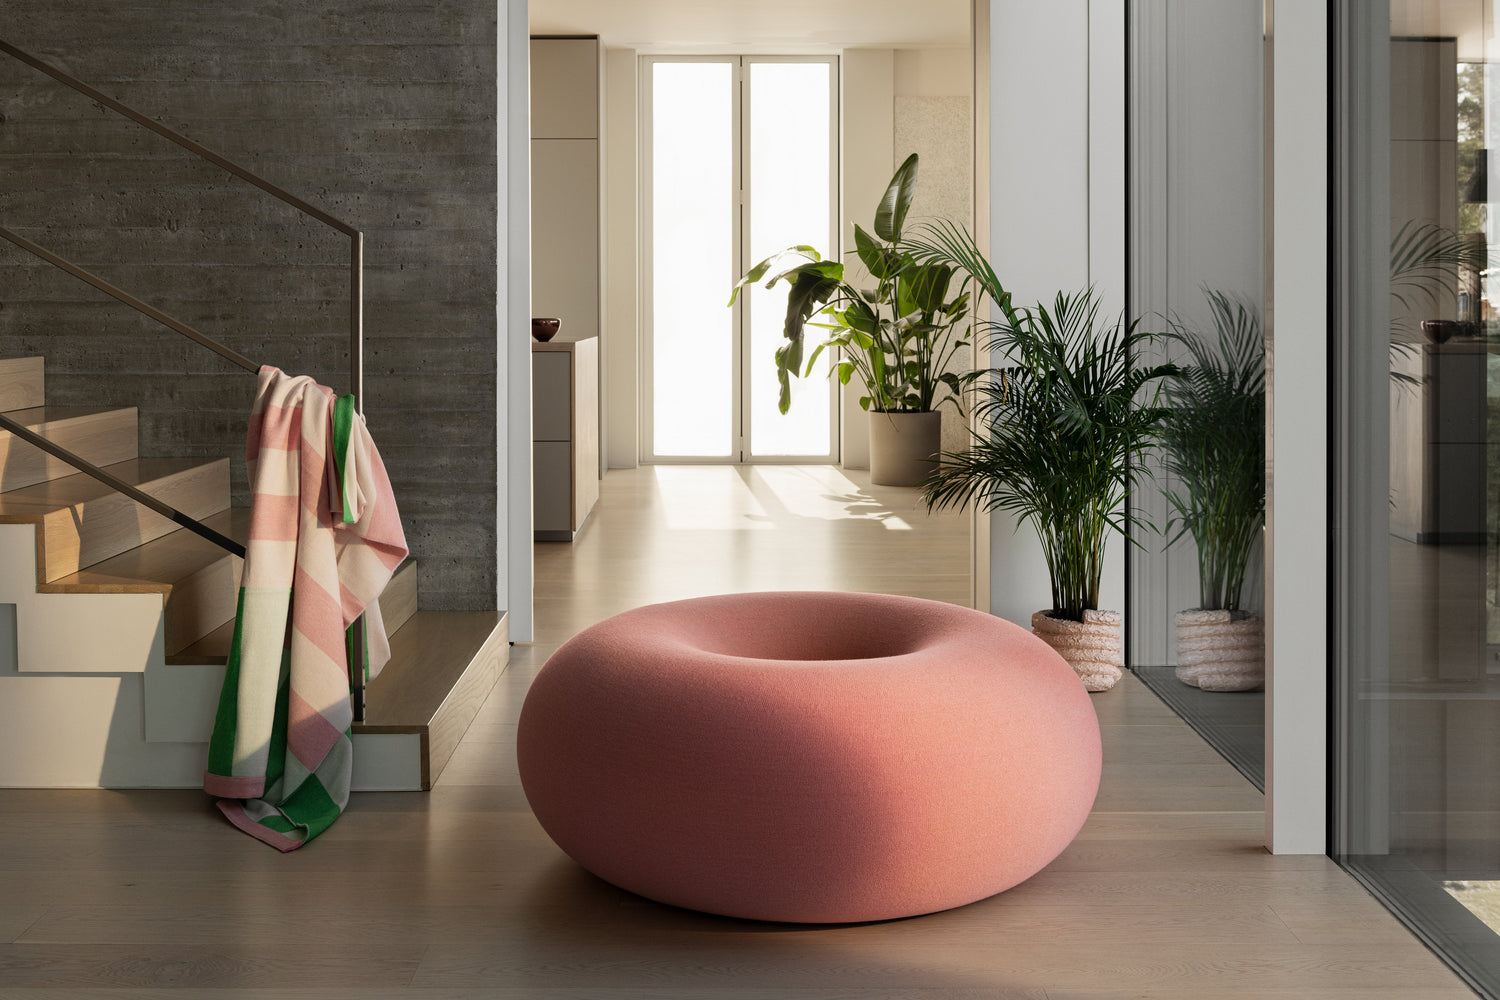 Boa Pouf in Cotton Candy featured in a hallway with a staircase on the side with a Stripe Throw in Pink / Green draped over the handrail.